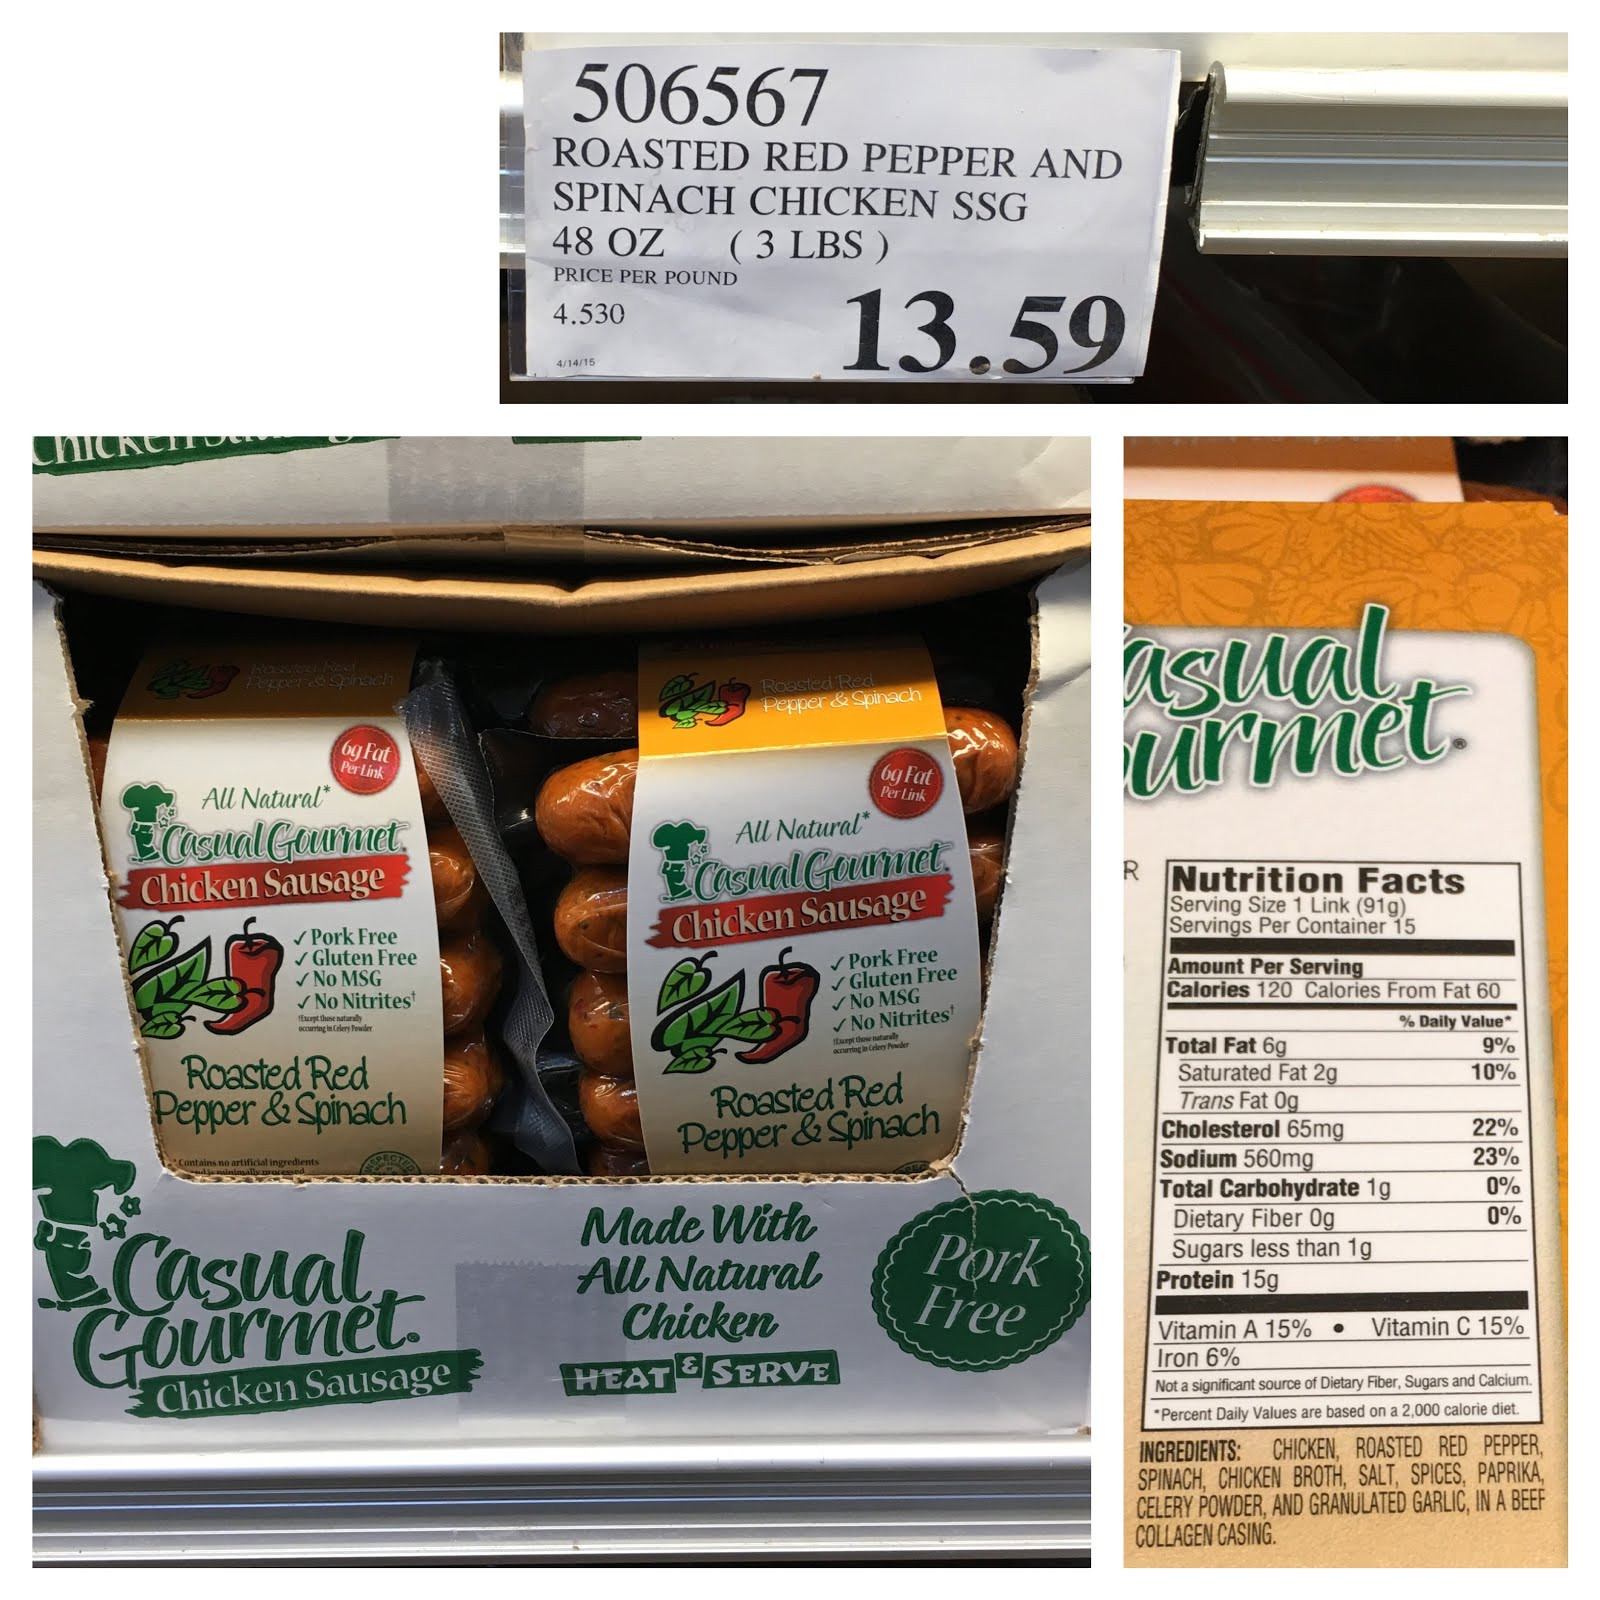 Casual Gourmet Chicken Sausage
 the Costco Connoisseur Survive your Whole30 with Costco